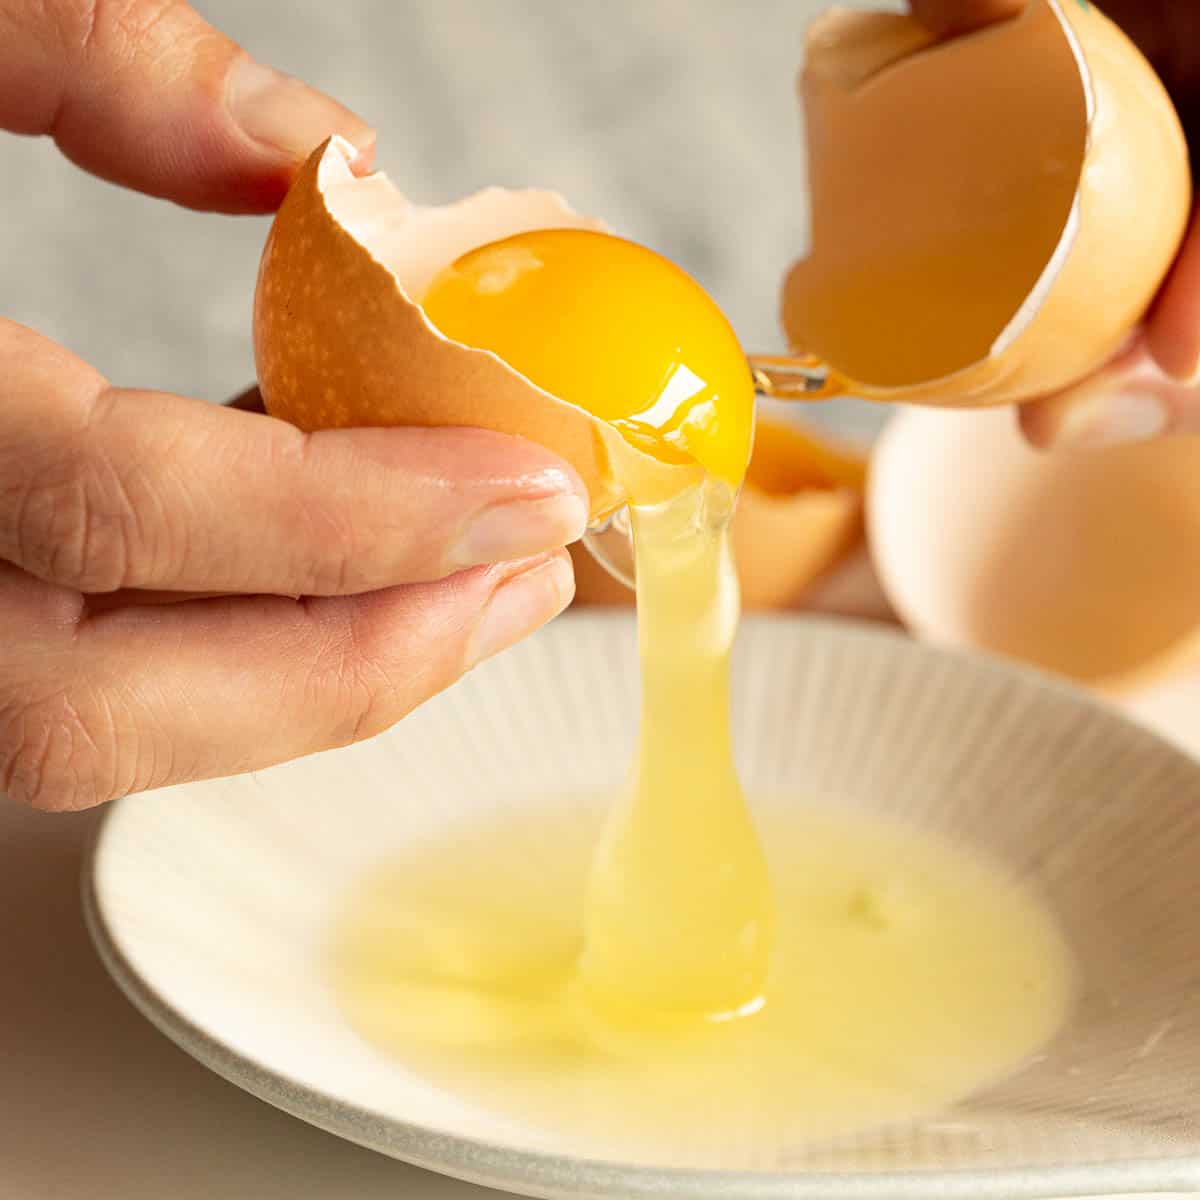 The egg white falls from the egg shell into a dish.